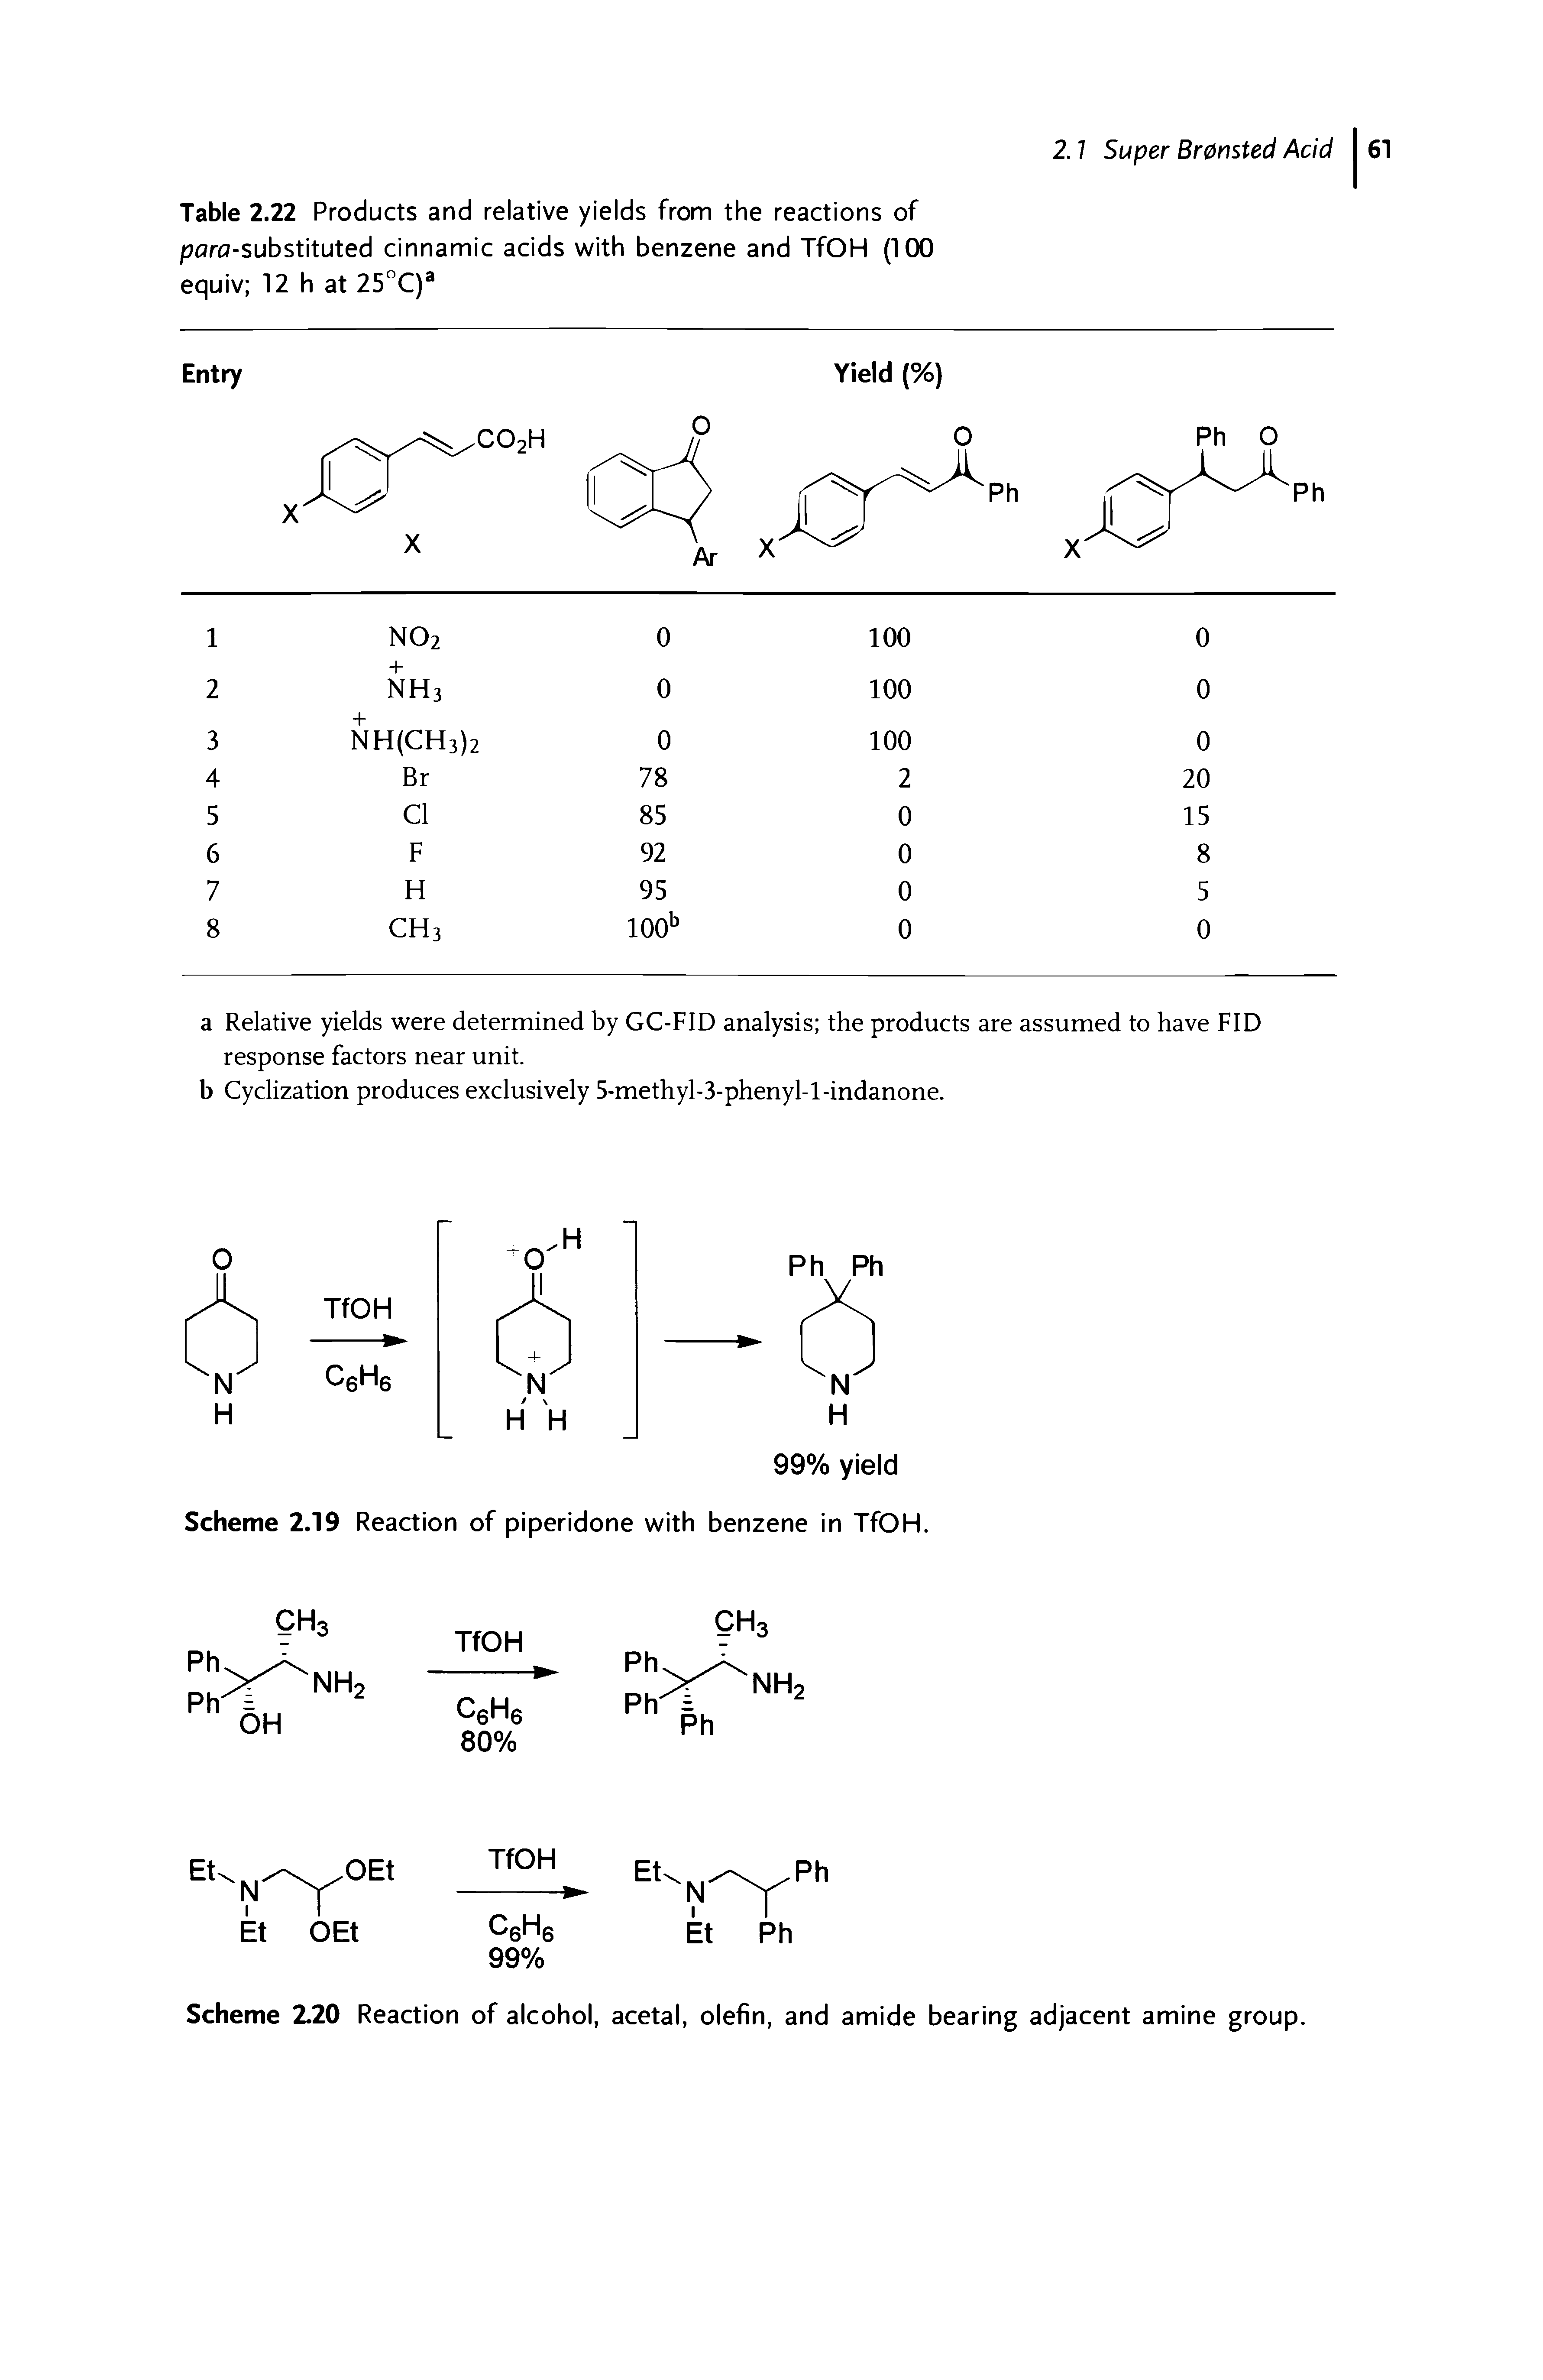 Table 2.22 Products and relative yields from the reactions of poro-substituted cinnamic acids with benzene and TfOH (100 equiv 12 h at 25°C) ...